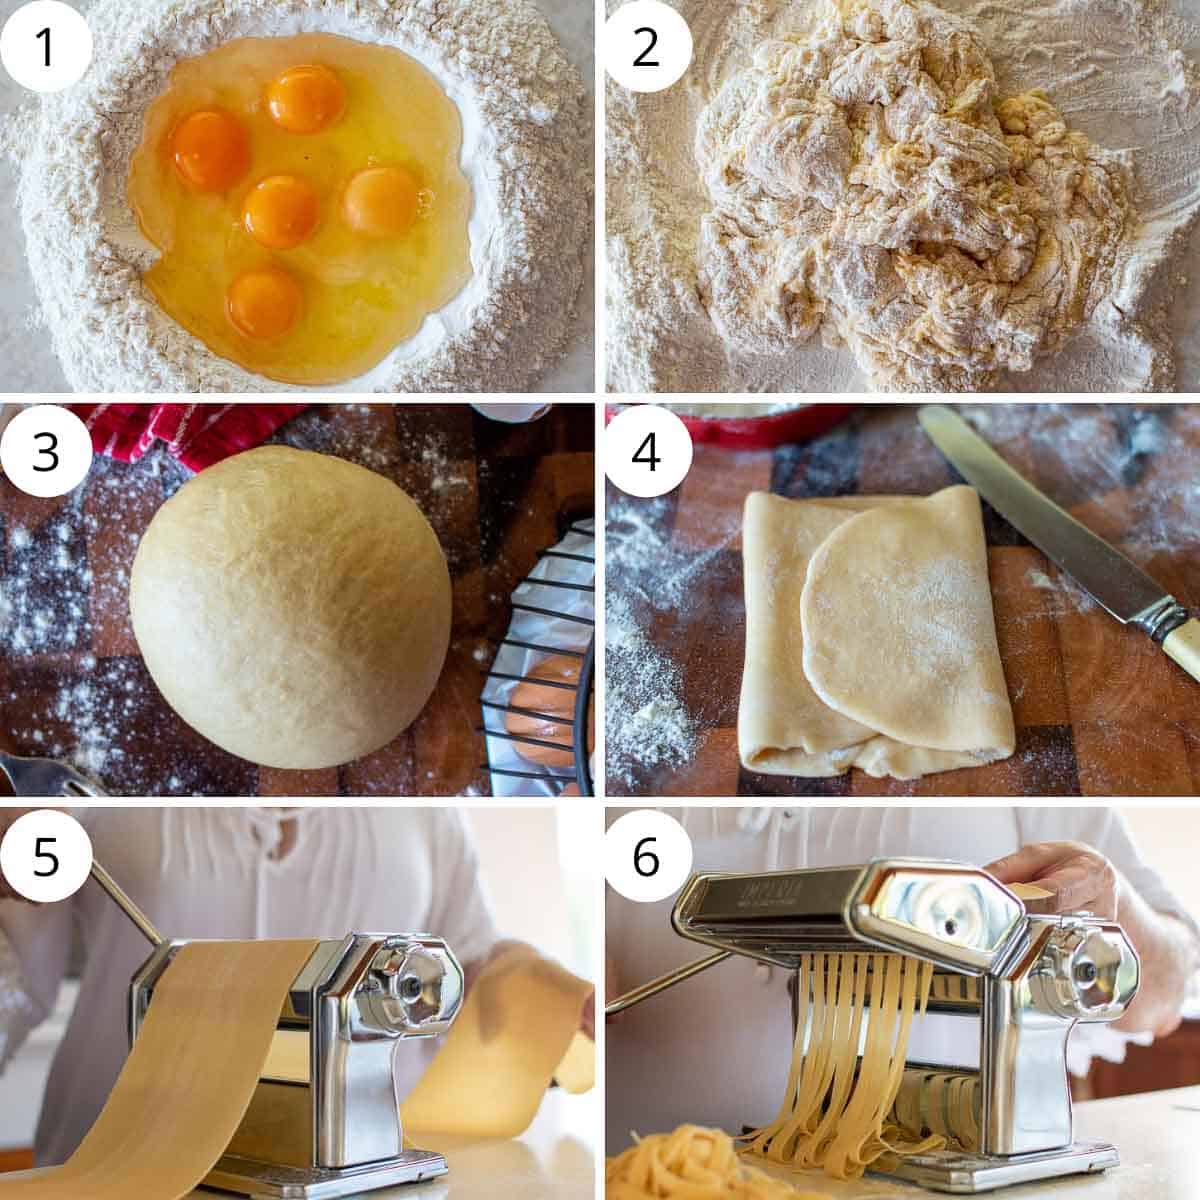 6 step photo collage showing how to make pasta.